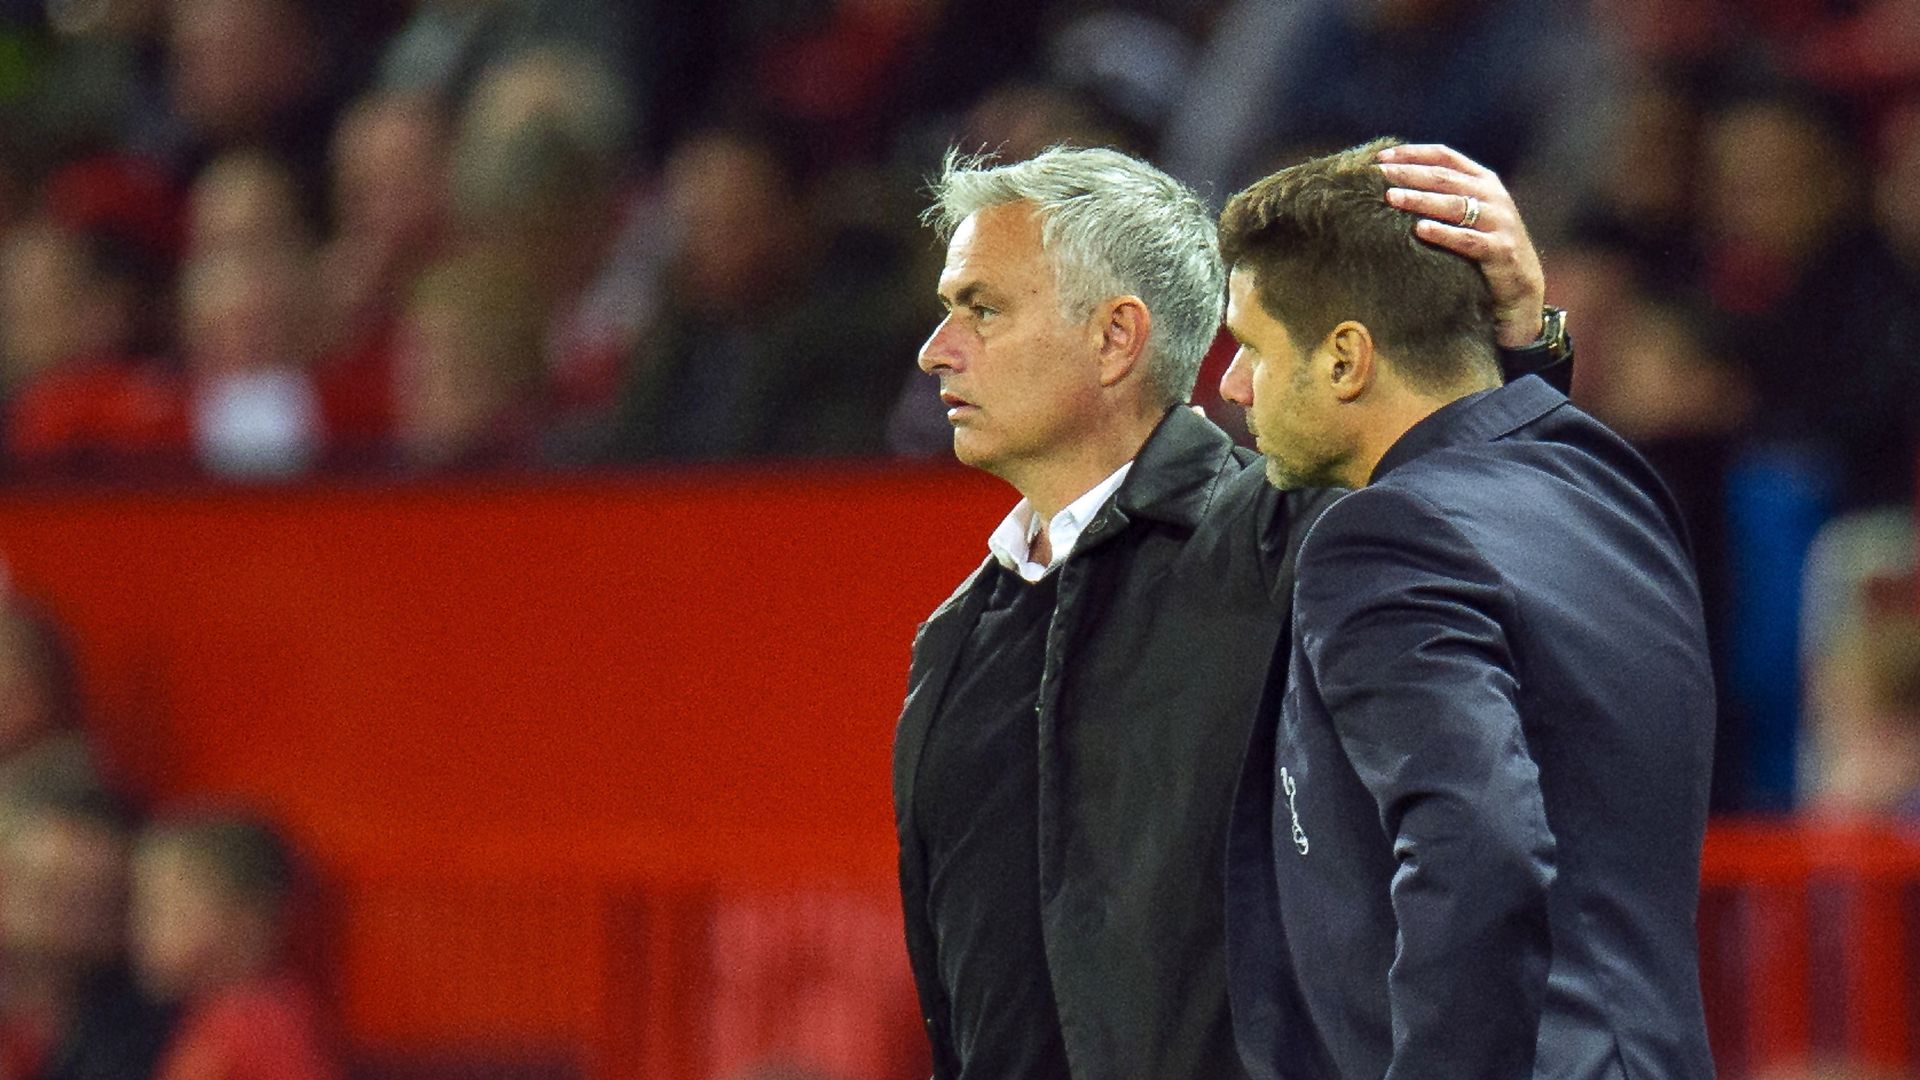 epa08010669 (FILE) - Manchester United manager Jose Mourinho (L) reacts with Tottenham Hotspur manager Mauricio Pochettino (R) after the English Premier League soccer match between Manchester United and Tottenham at the Old Trafford in Manchester, Britain, 27 August 2018 (reissued 20 November 2019). Tottenham Hotspur have announced the appointment of Jose Mourinho as their new manager.  EPA/PETER POWELL